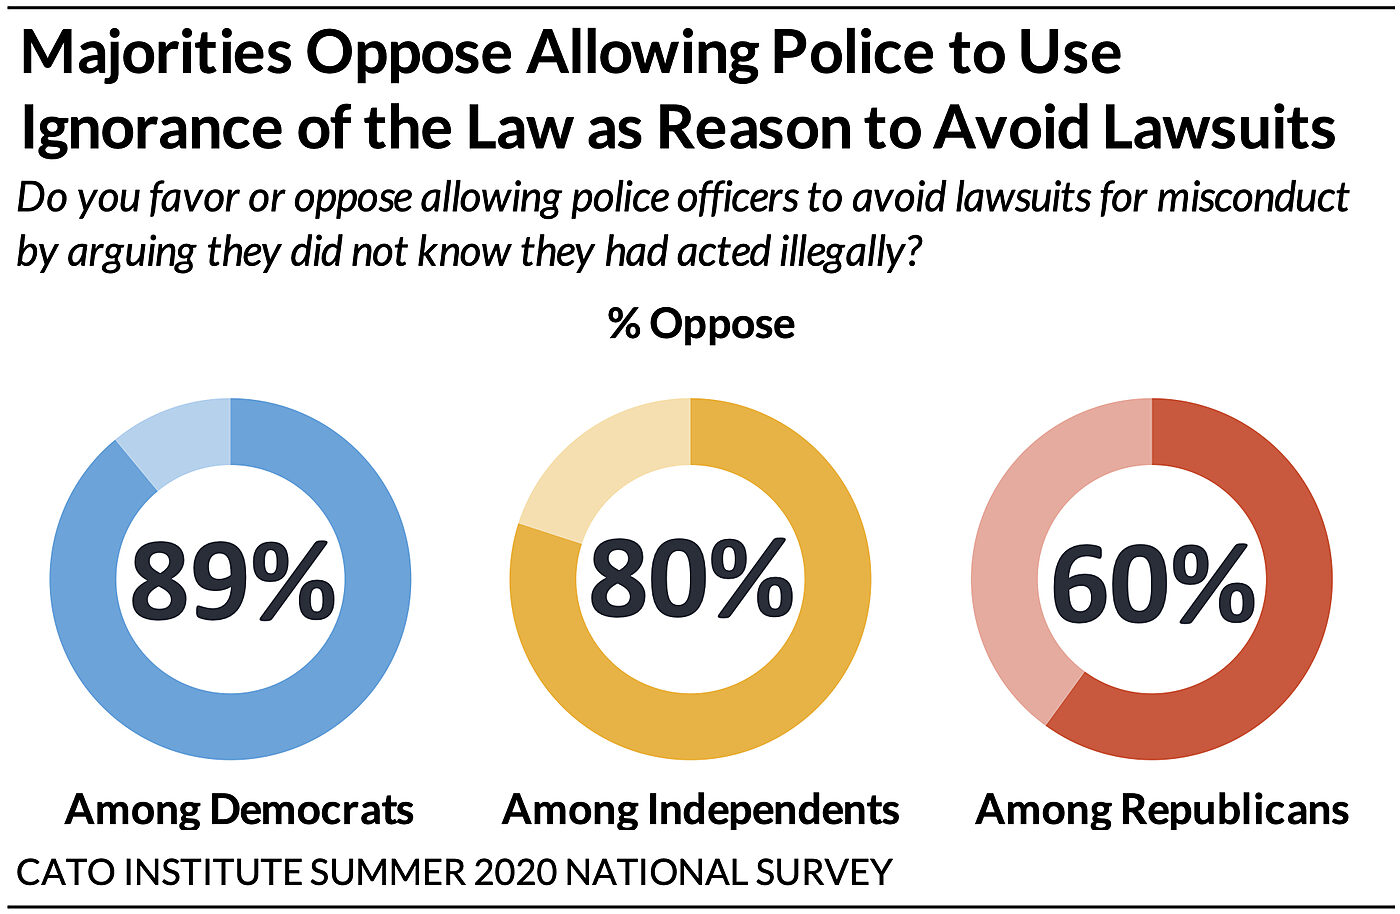 Majorities Oppose Allowing Police to Use Ignorance of the Law as Reason to Avoid Lawsuits